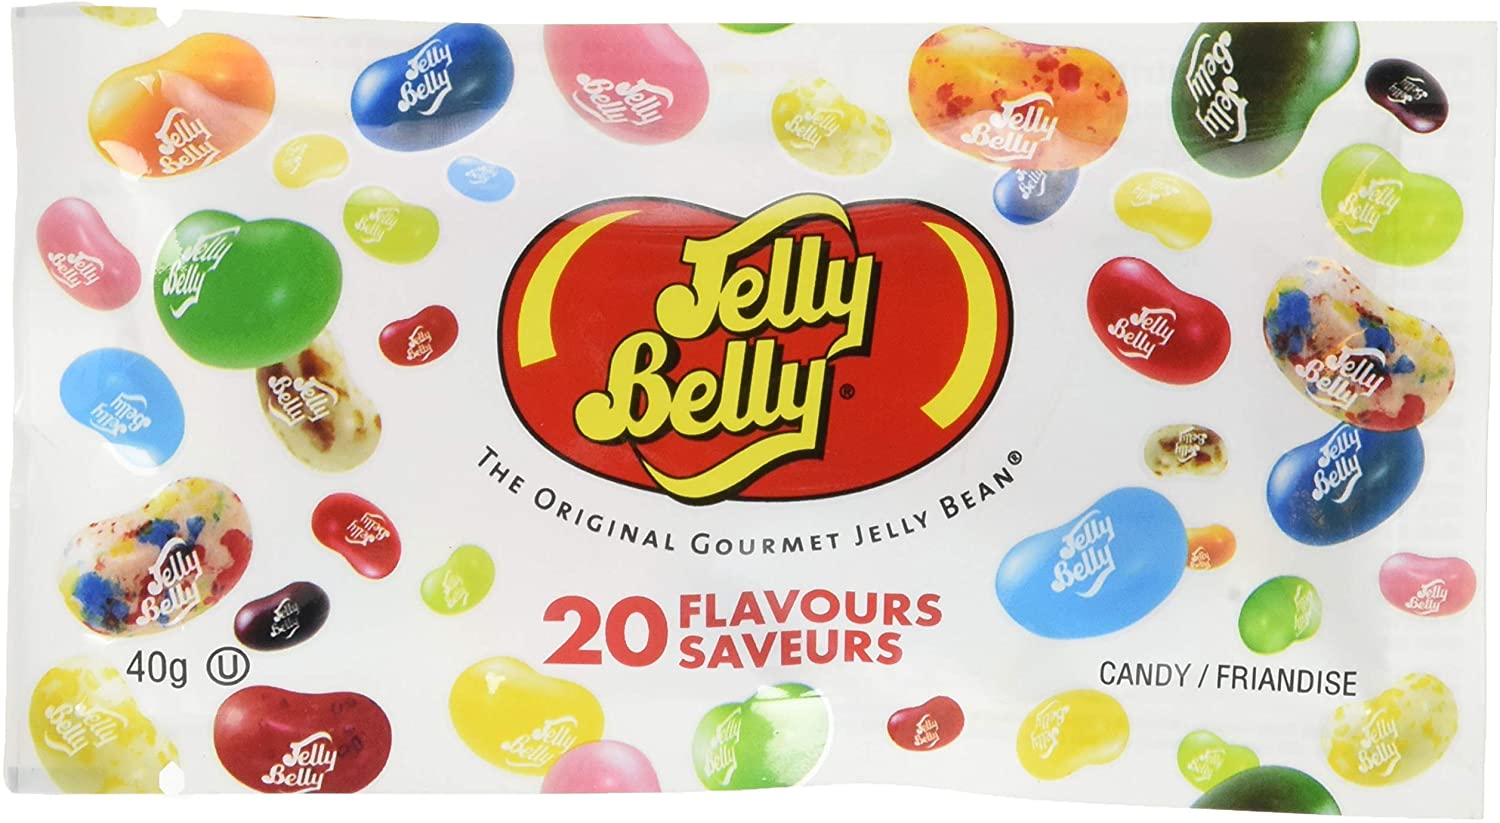 JELLY BELLY: Official Online Retailer of Gourmet Jelly Belly Candies and Confections. Jelly Belly Candy Company, over 100 years of Candy-Making Expertise.